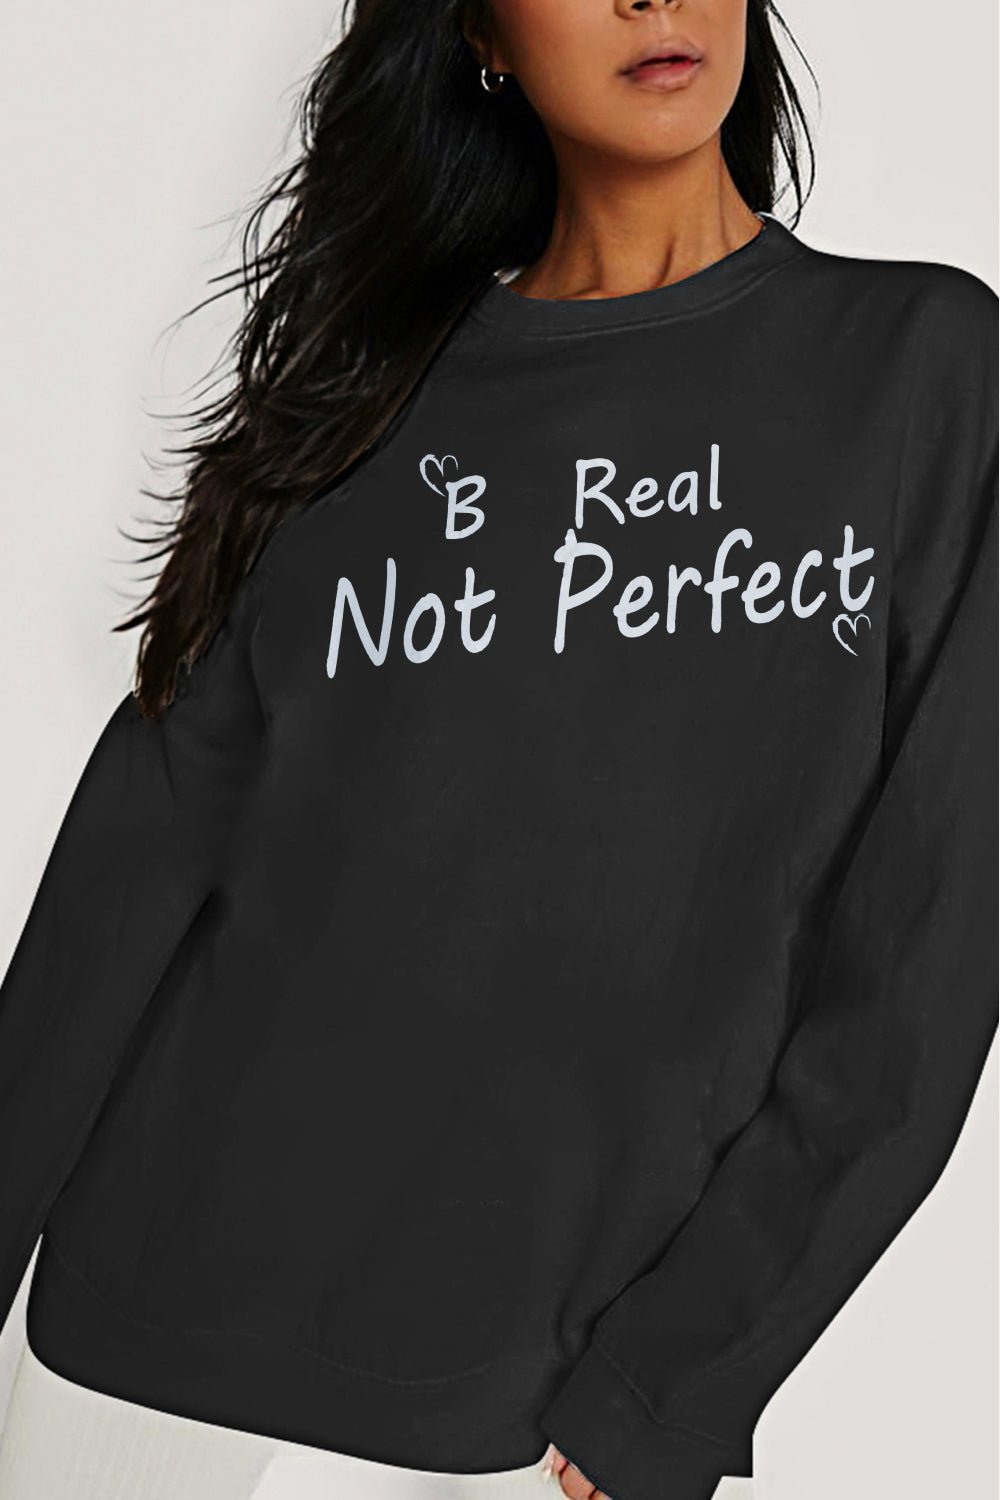 Simply Love Full Size BE REAL NOT PERFECT Graphic Sweatshirt - GemThreads Boutique